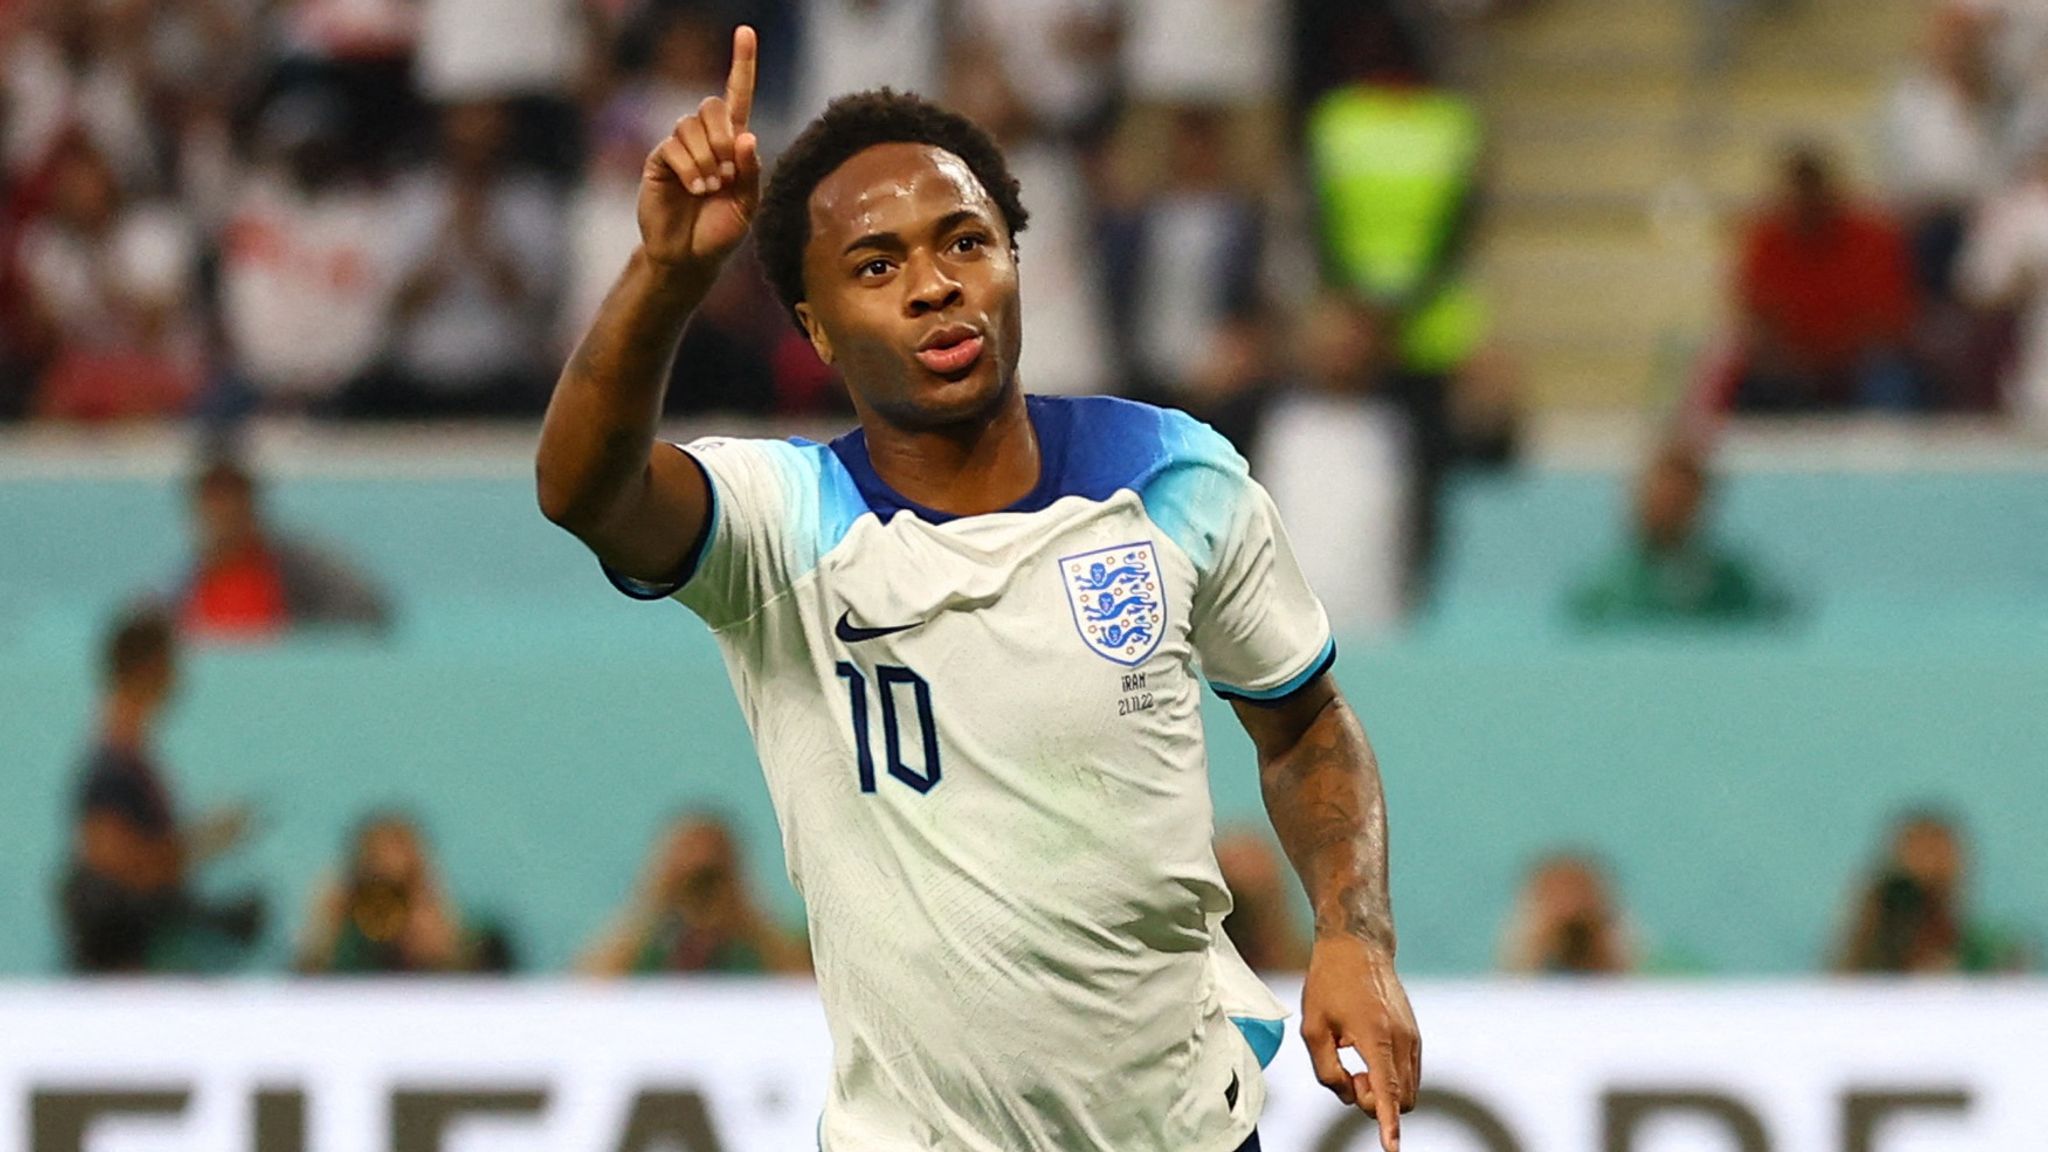 Raheem Sterling to return to England's World Cup base in Qatar | UK News | Sky News